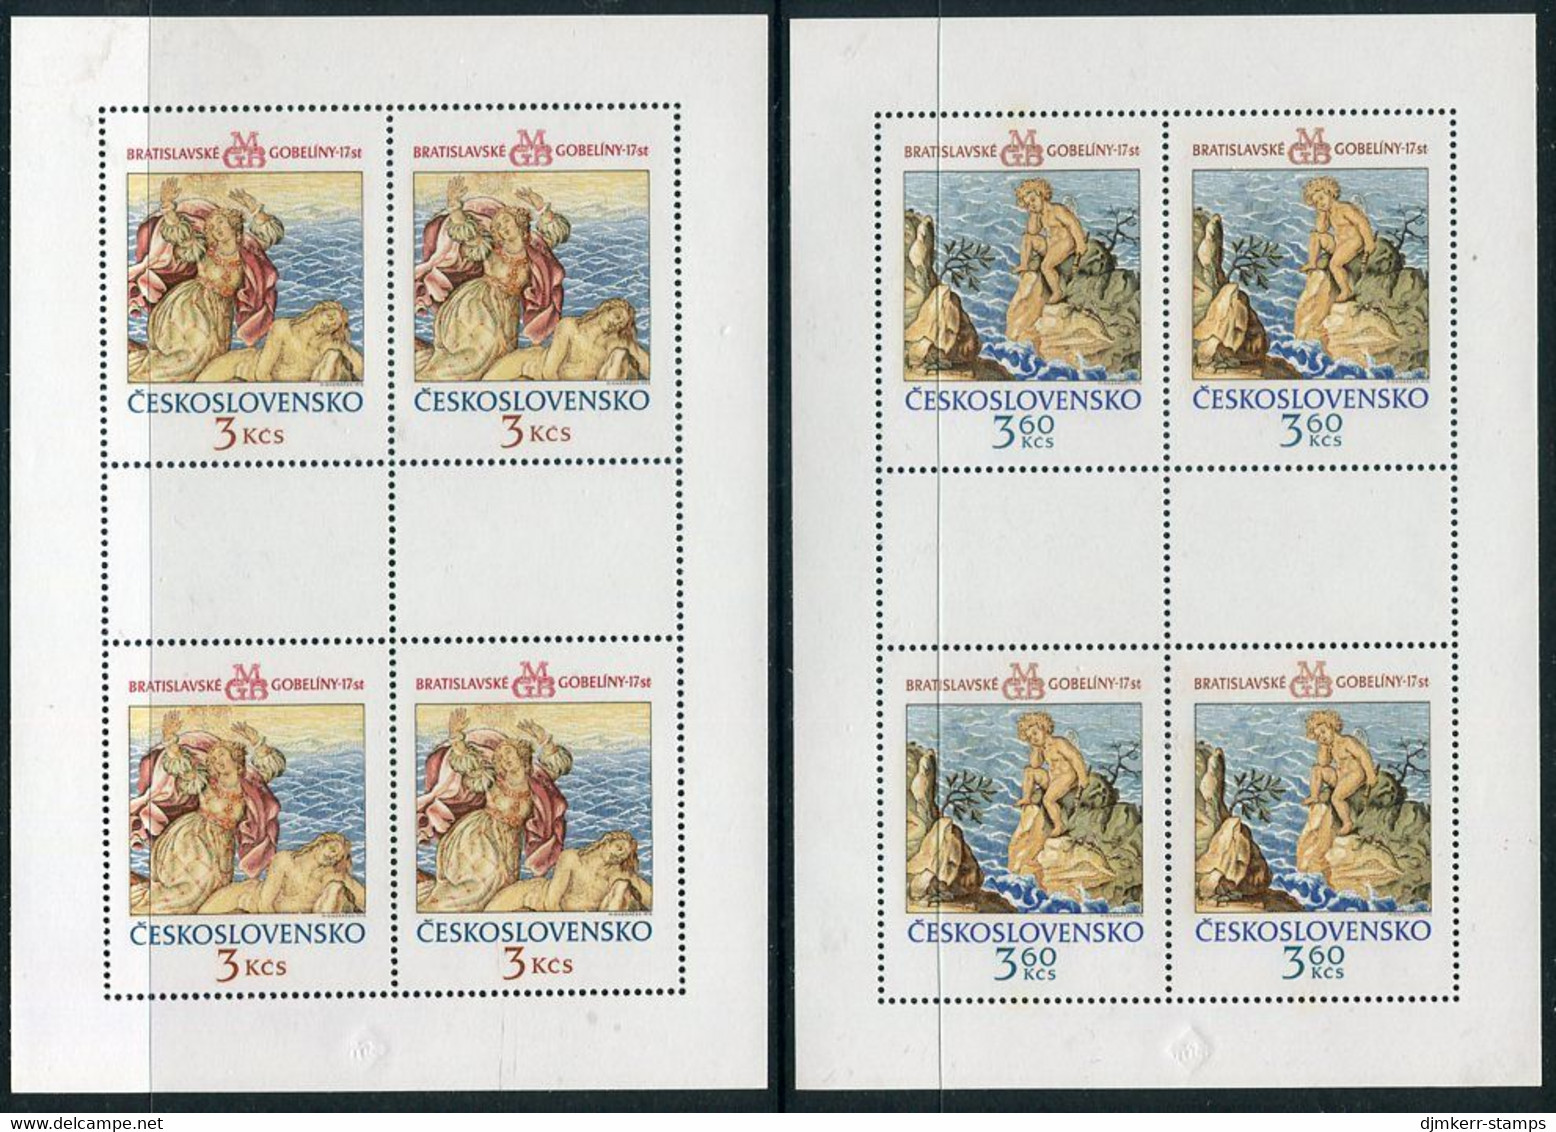 CZECHOSLOVAKIA 1976 Bratislava Tapesteries In Sheetlets Of 4 MNH / **  Michel 2319-20 Kb - Unused Stamps